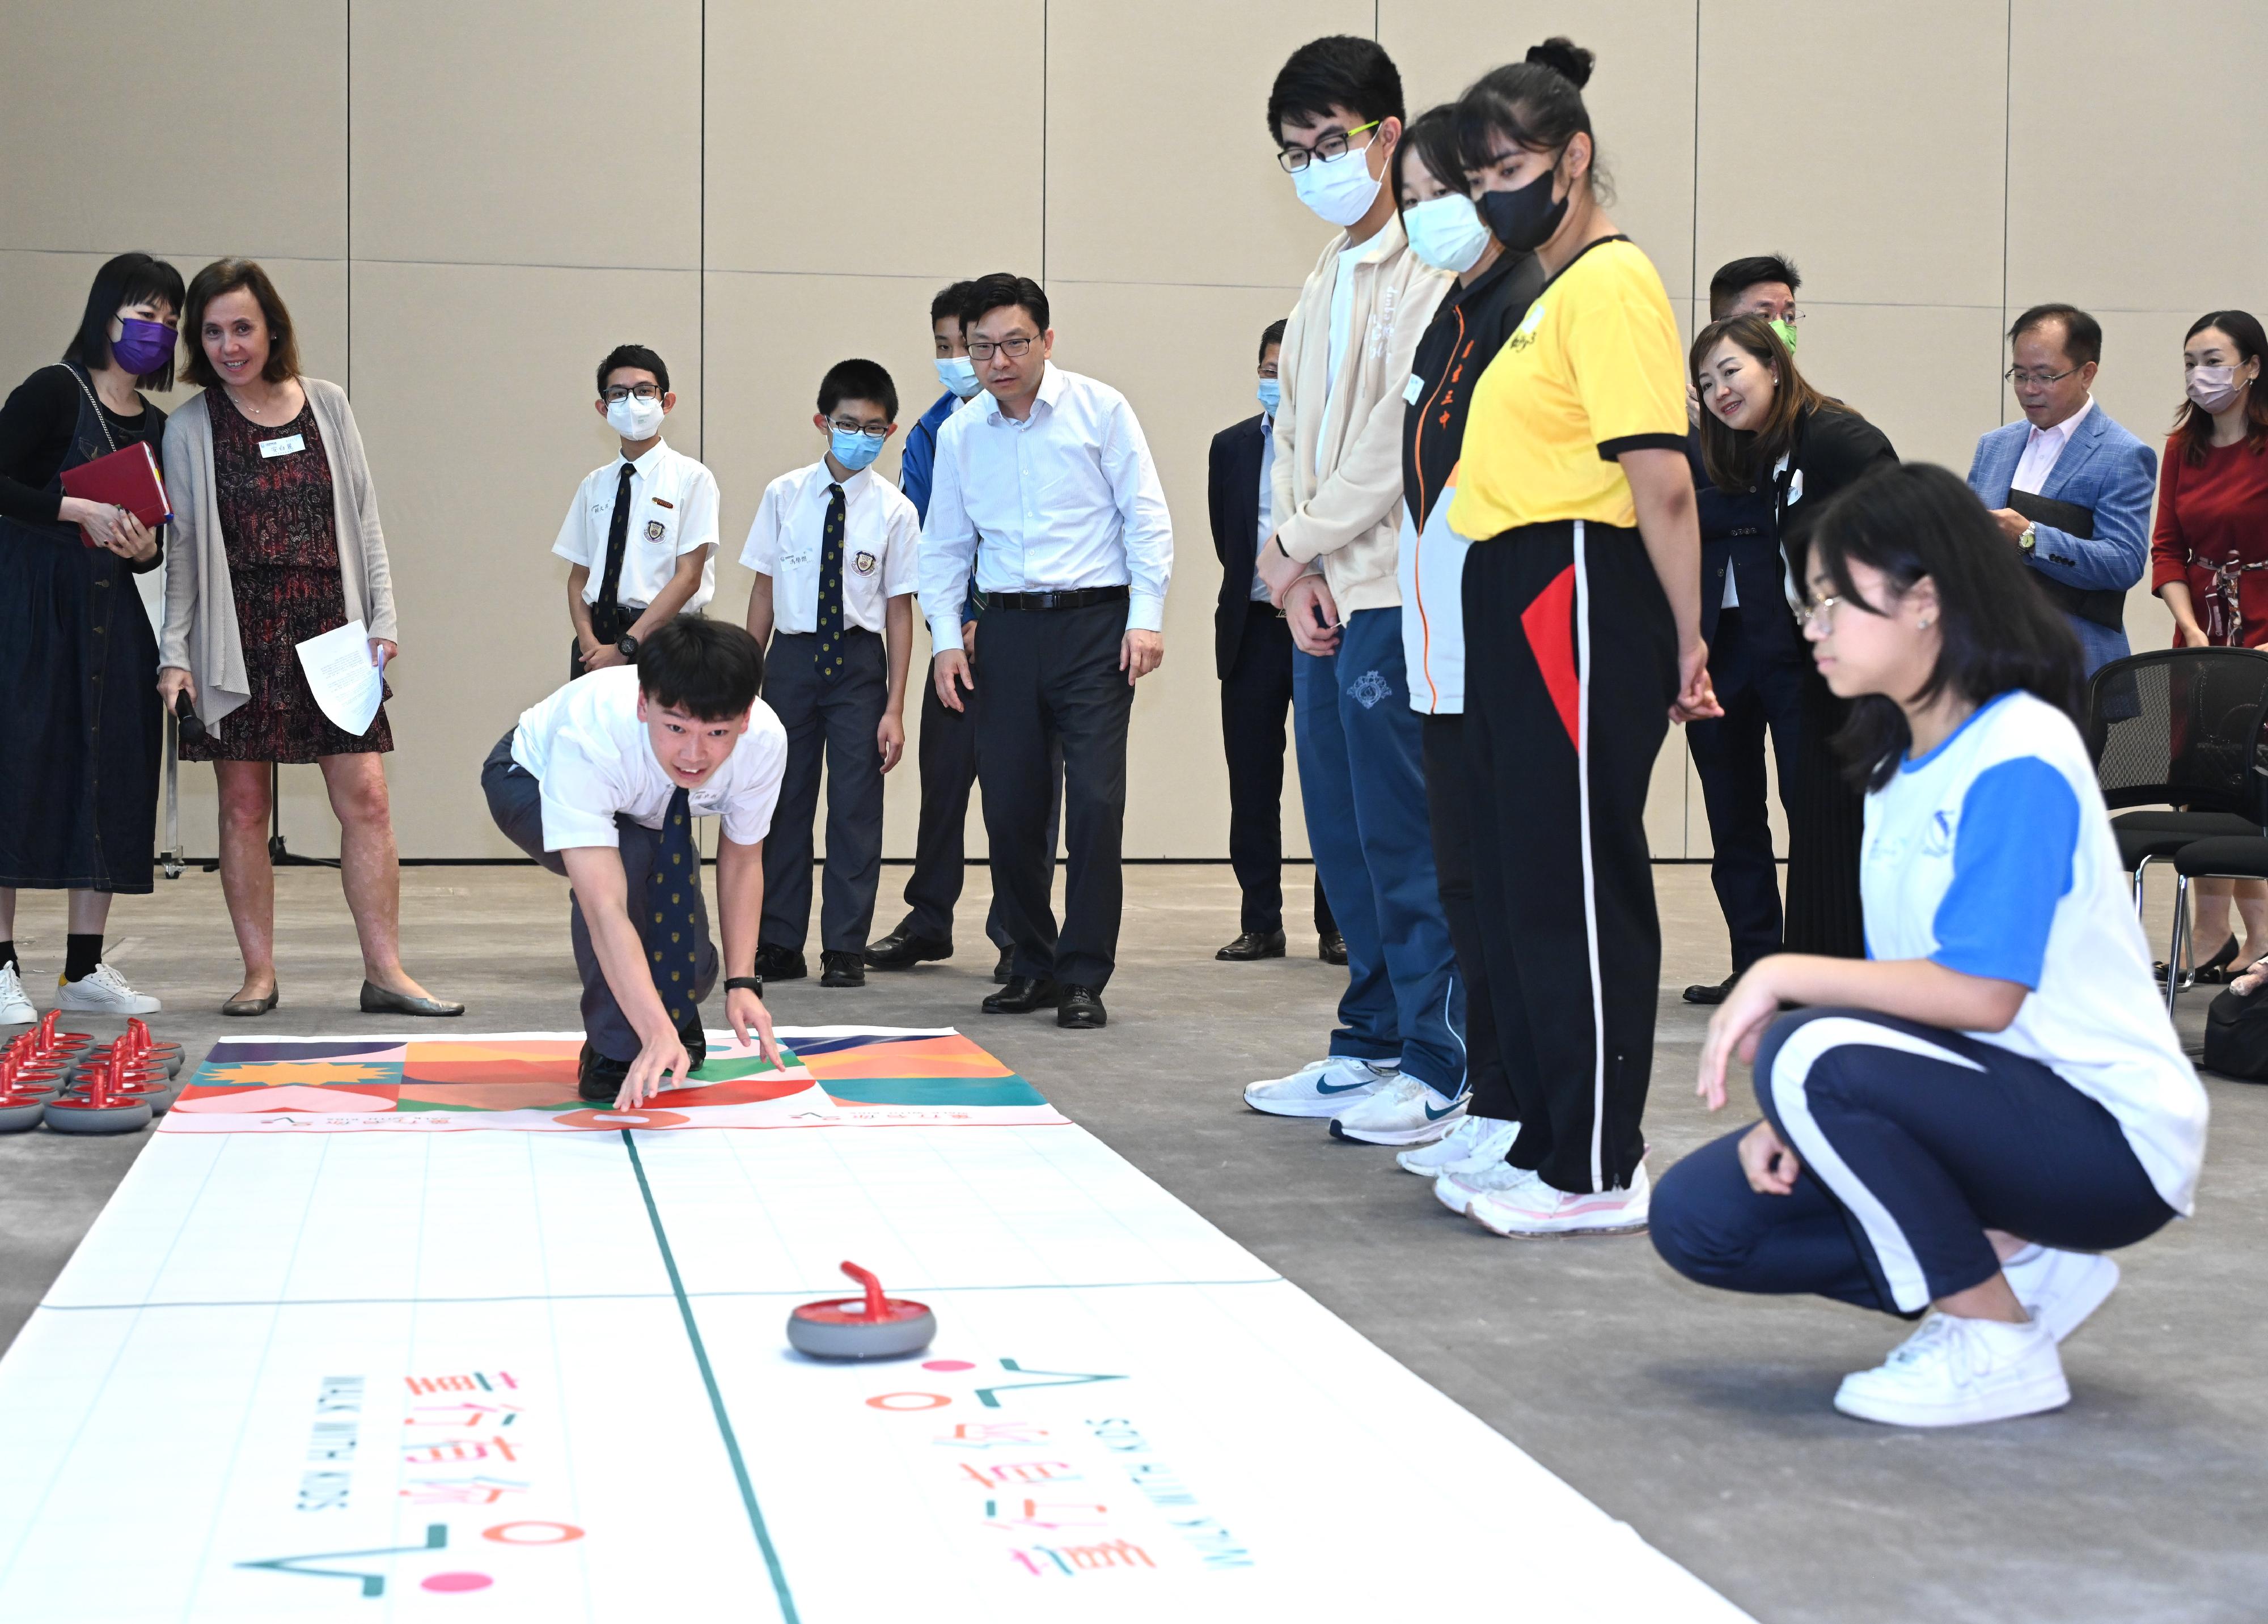 The Commission on Children (CoC) today (May 5) held an engagement session for collecting views of children and relevant stakeholders on the challenges of resuming normal school life after the COVID-19 epidemic. Photo shows the Secretary for Labour and Welfare and Vice-chairperson of the CoC, Mr Chris Sun (standing, fifth left), observing a student in a game.